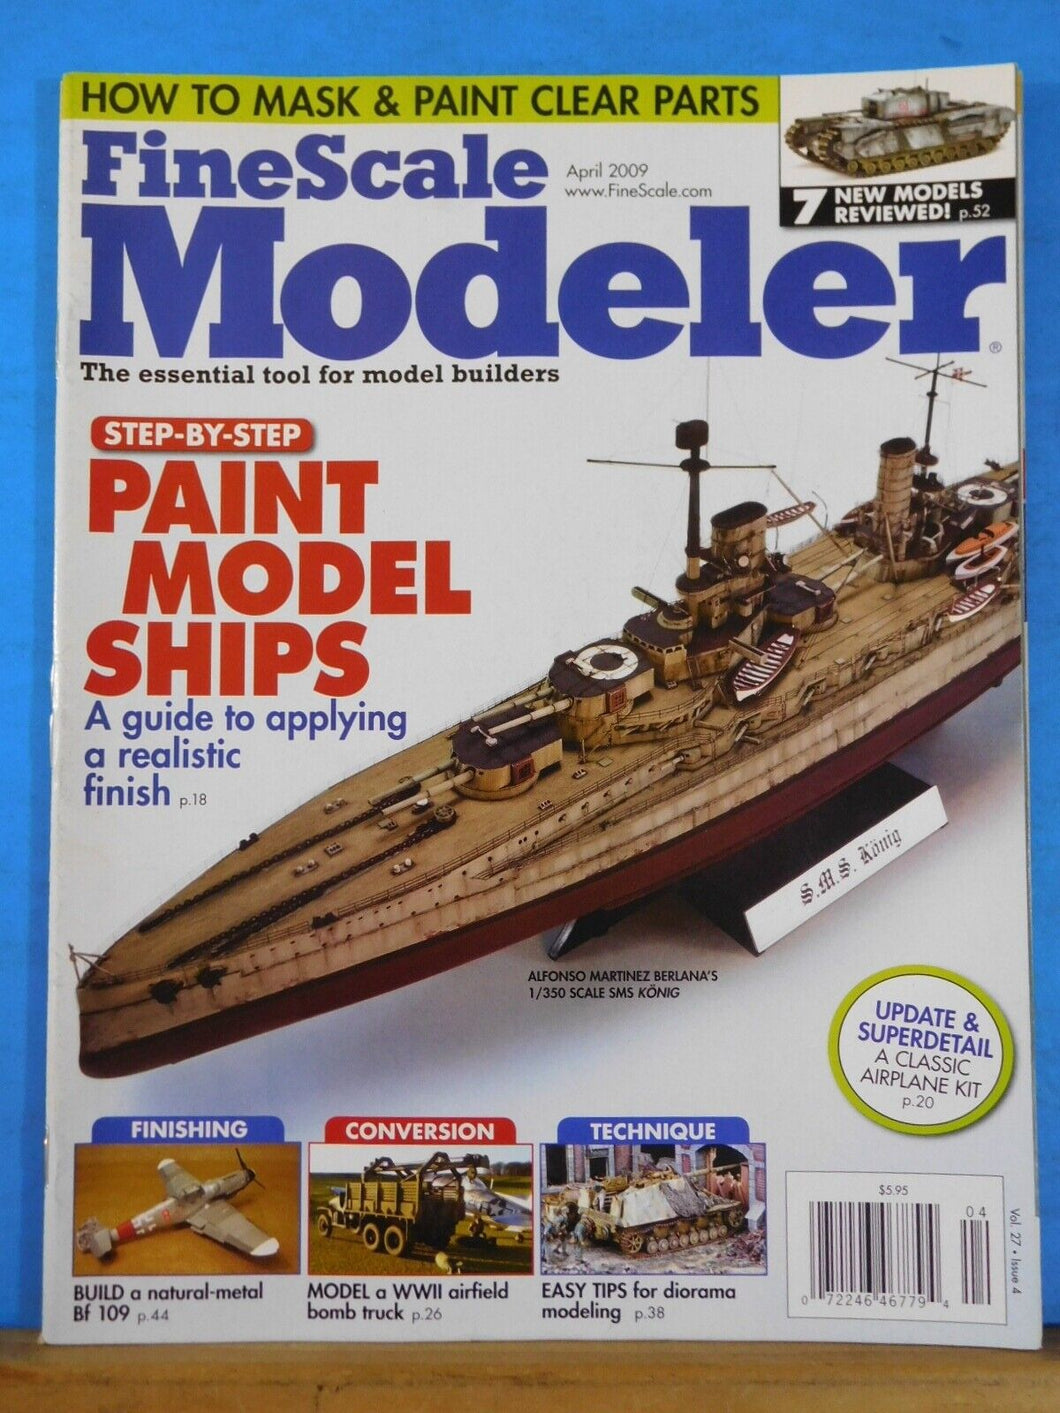 FineScale Modeler 2009 April Step by Step Paint Model Ships